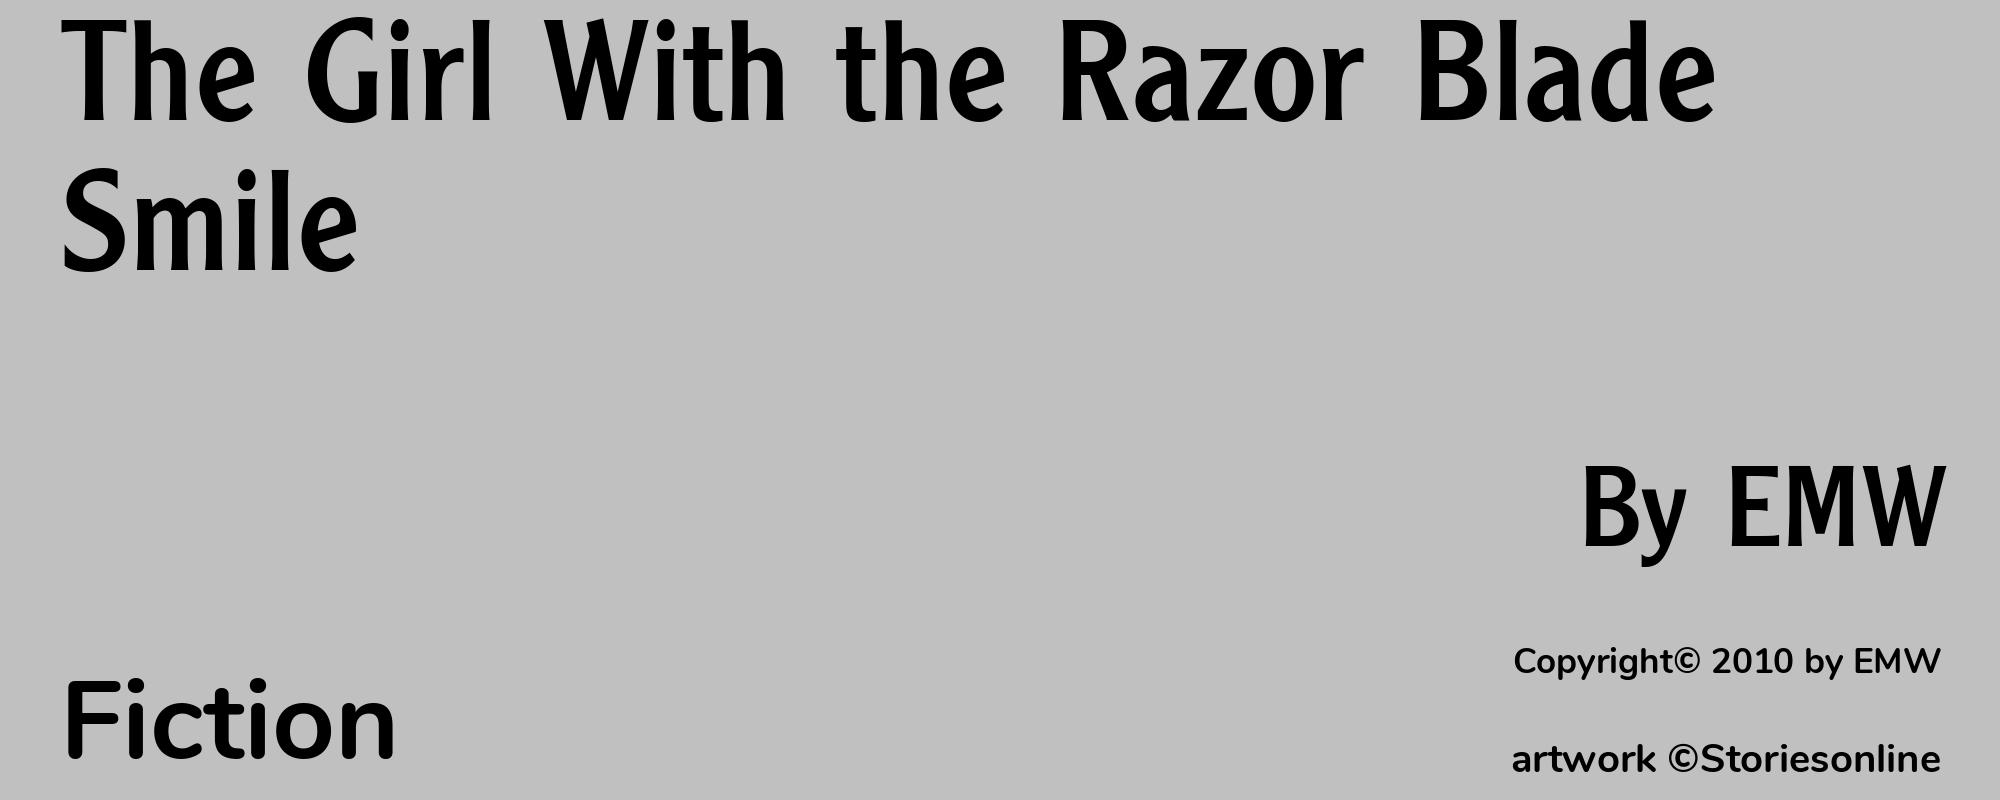 The Girl With the Razor Blade Smile - Cover